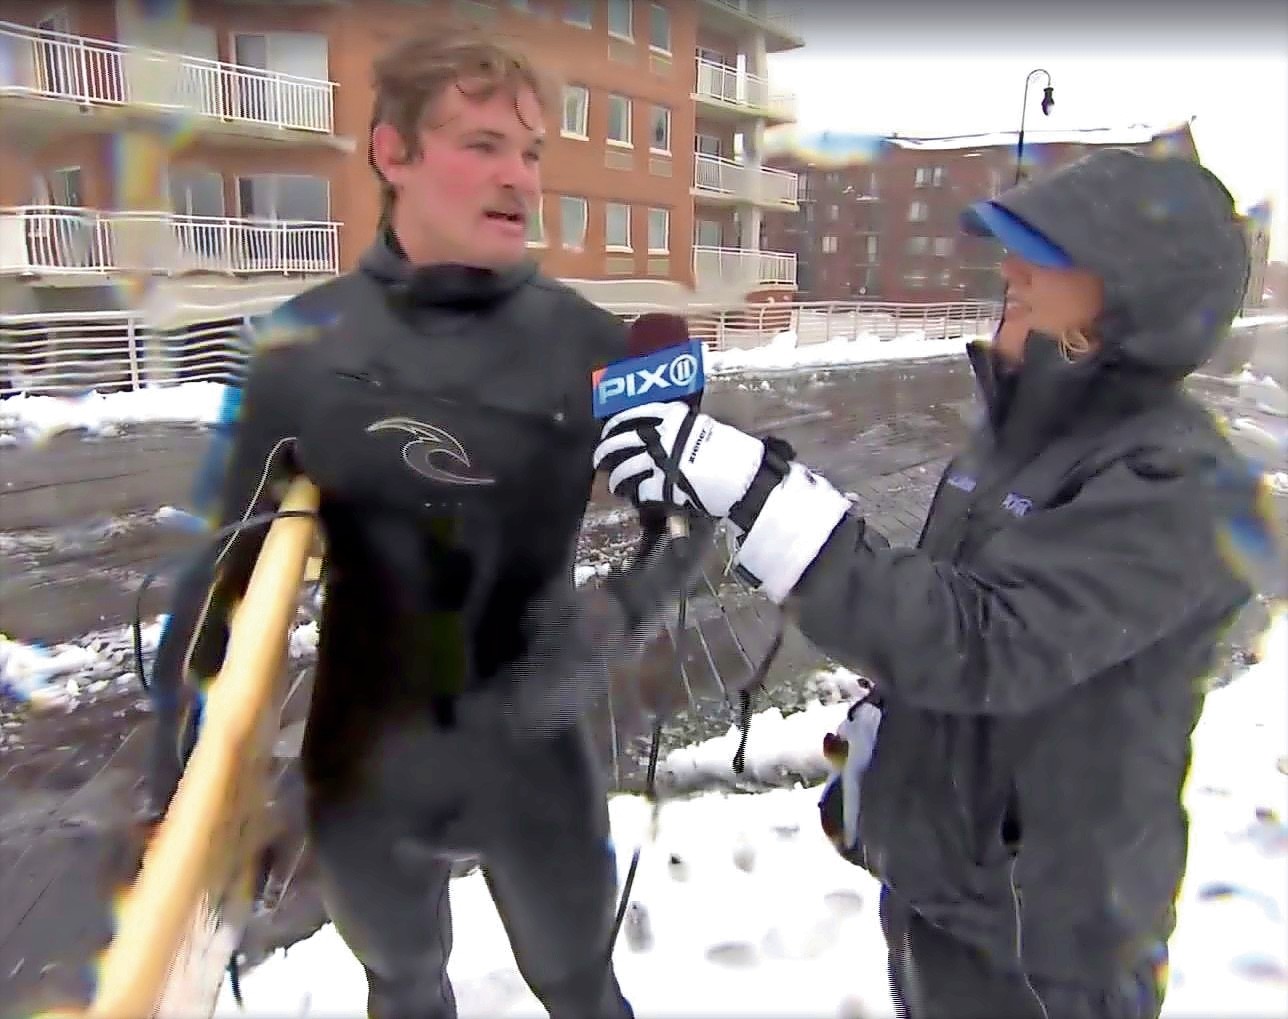 Surfer Adam Winerip made the news on Tuesday, and told PIX11 reporter Kirstin Cole that it was his first time surfing and had floated for about a mile in a nor’easter.